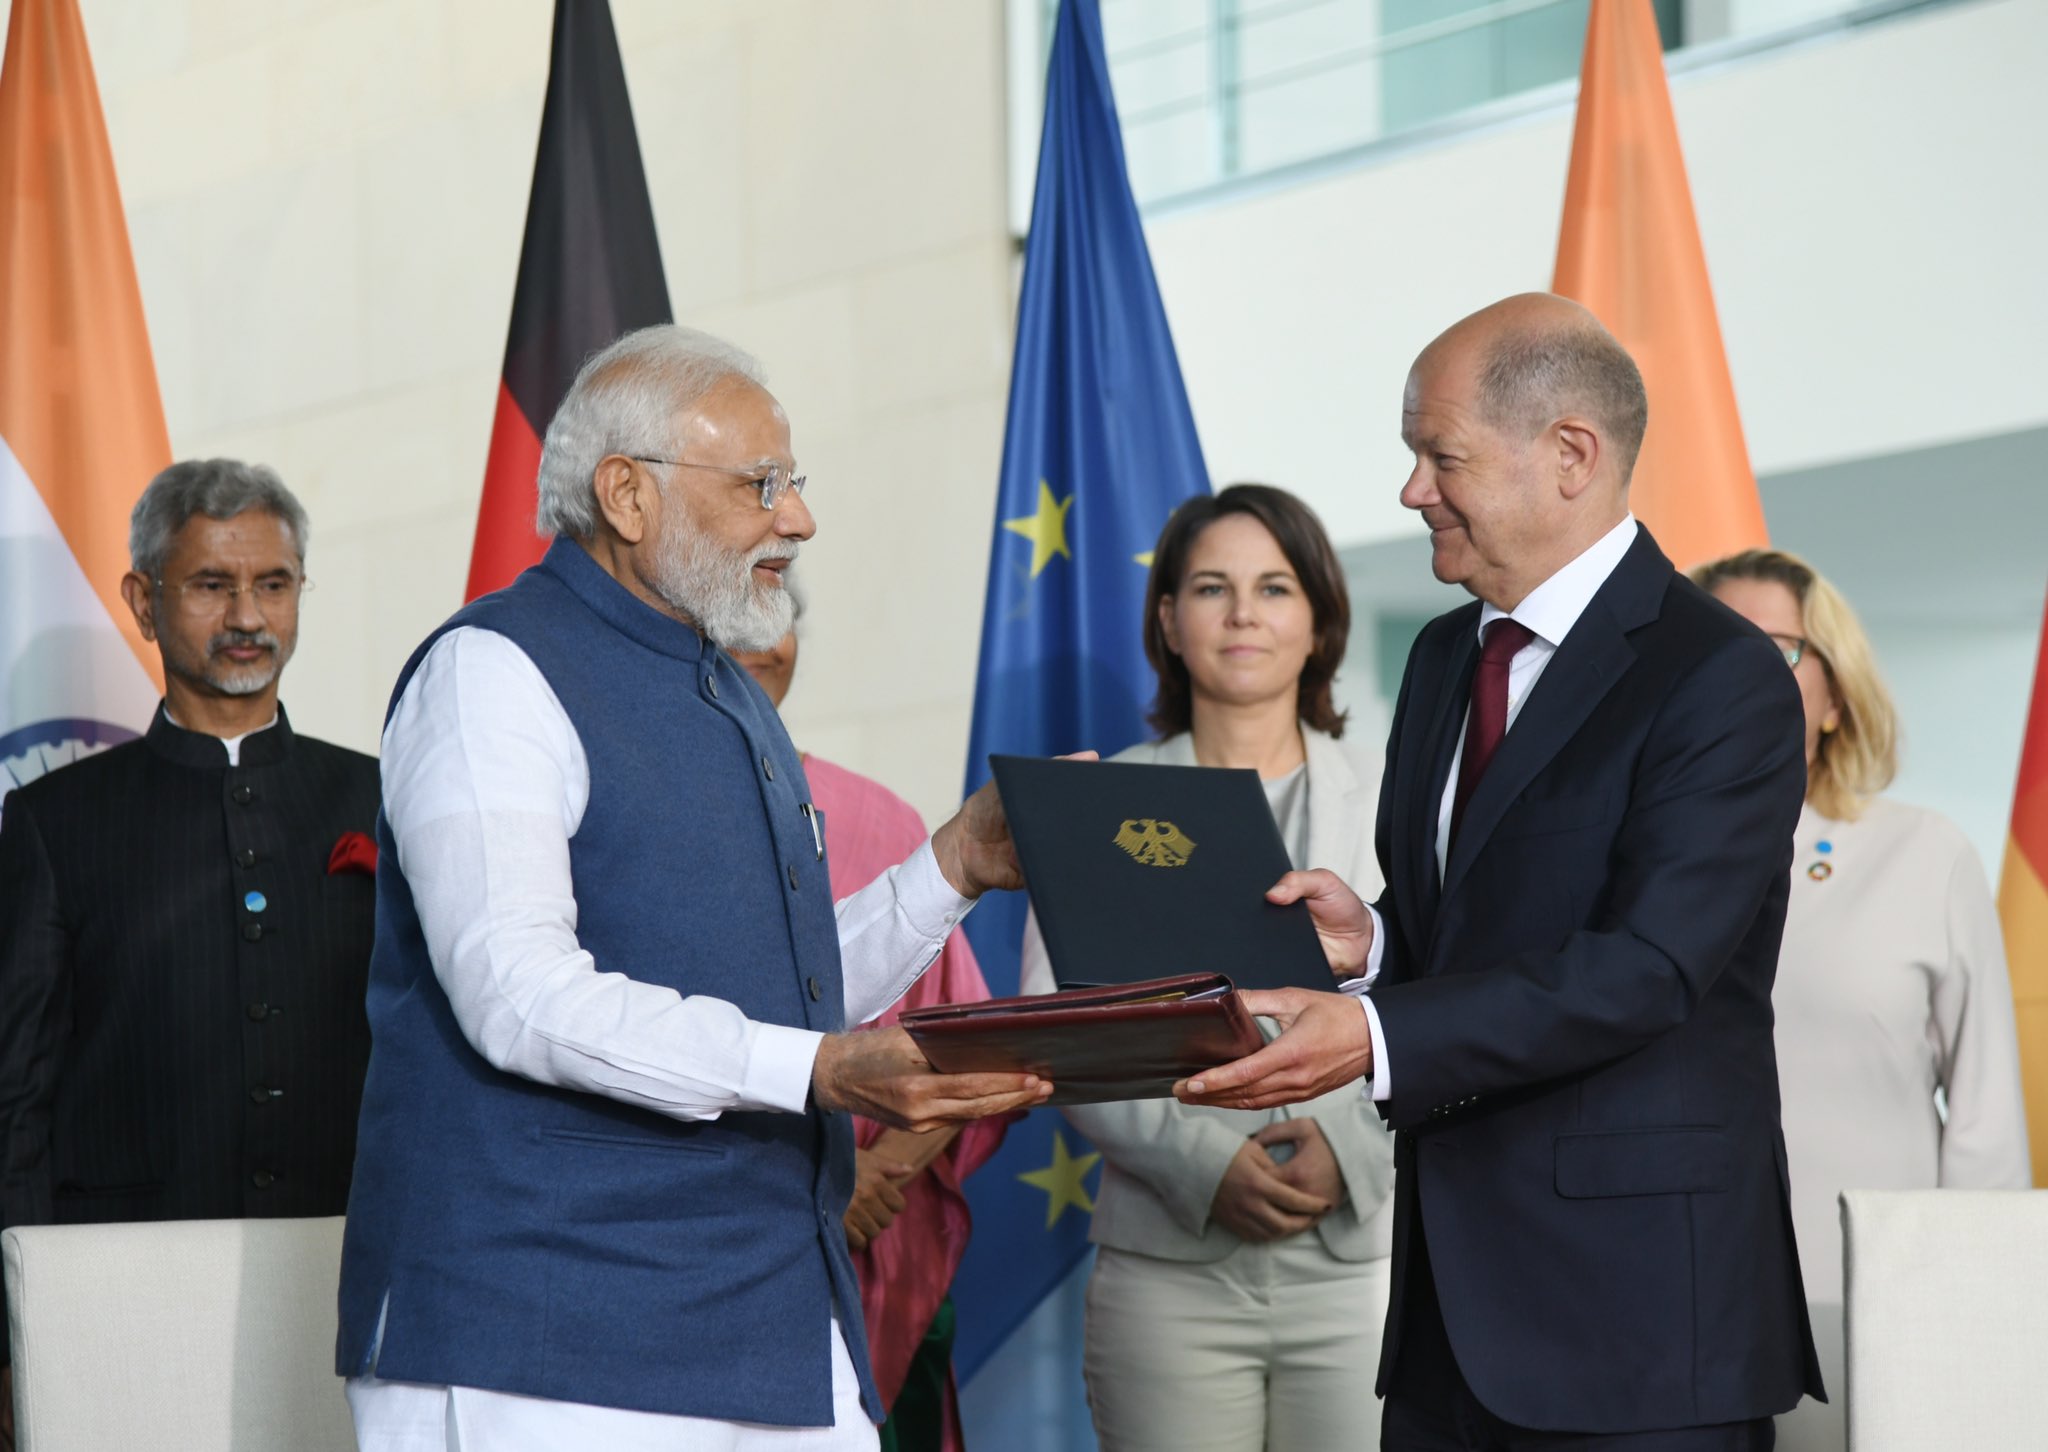 India, Germany stress on free, open and inclusive Indo-Pacific